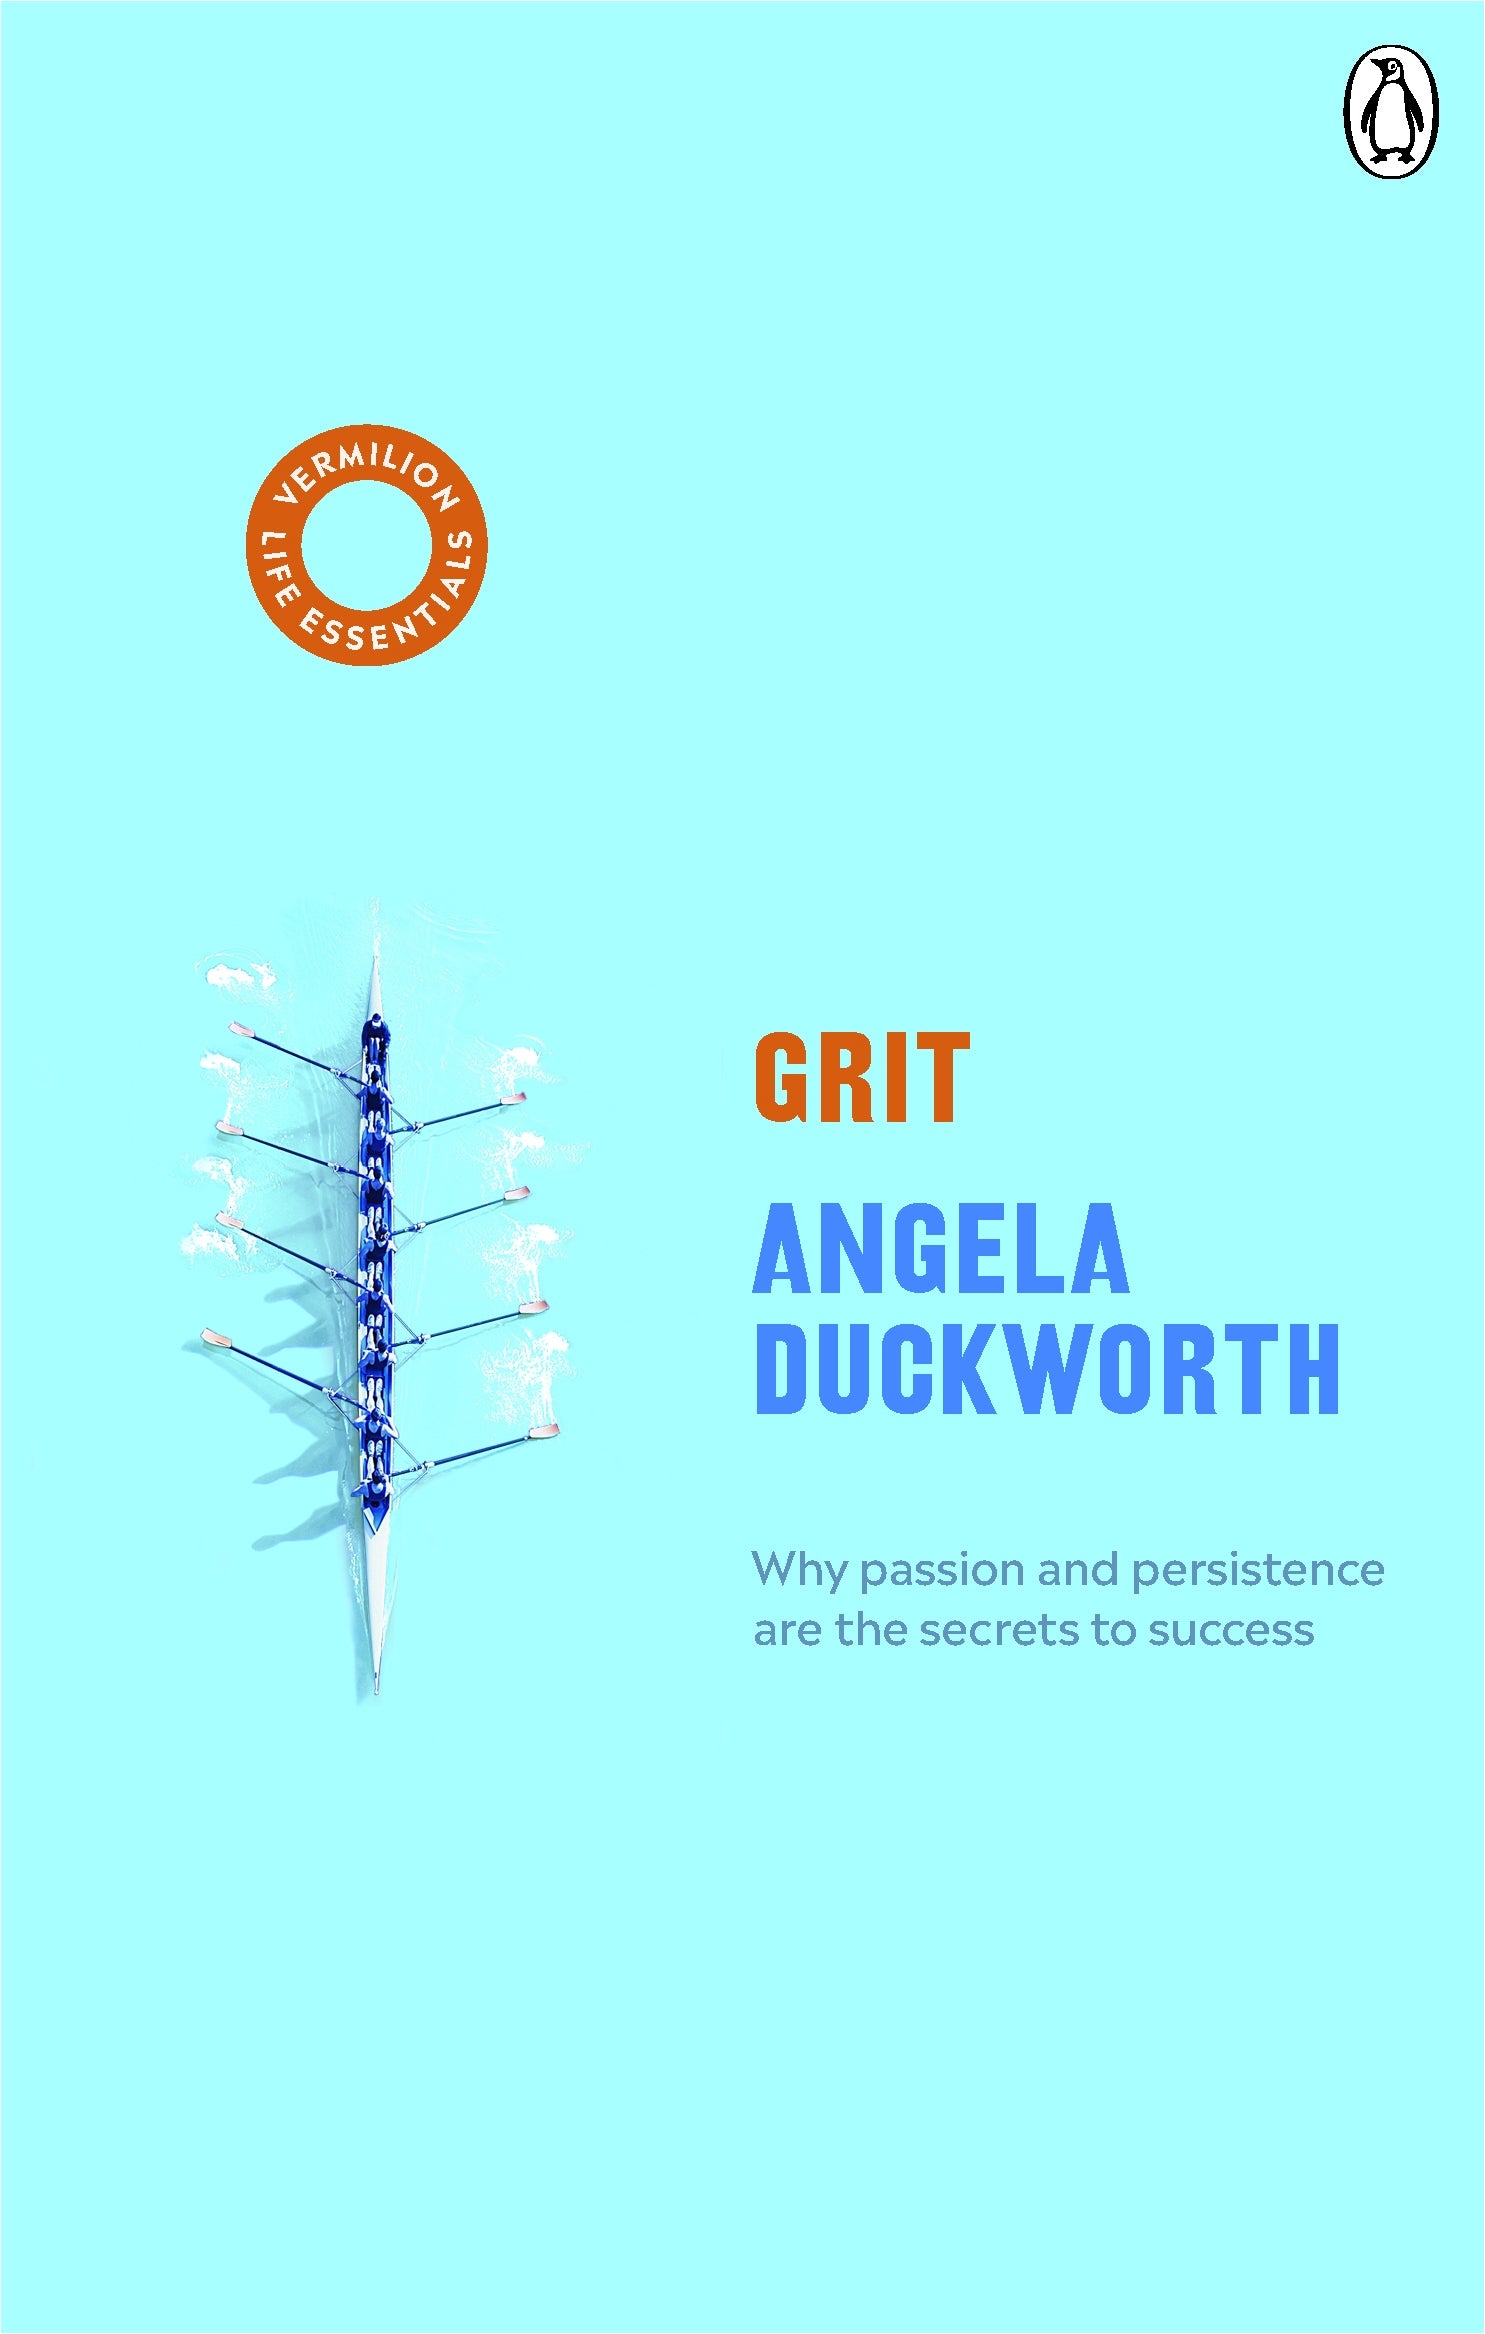 Grit by Angela Duckworth non fiction books booxies